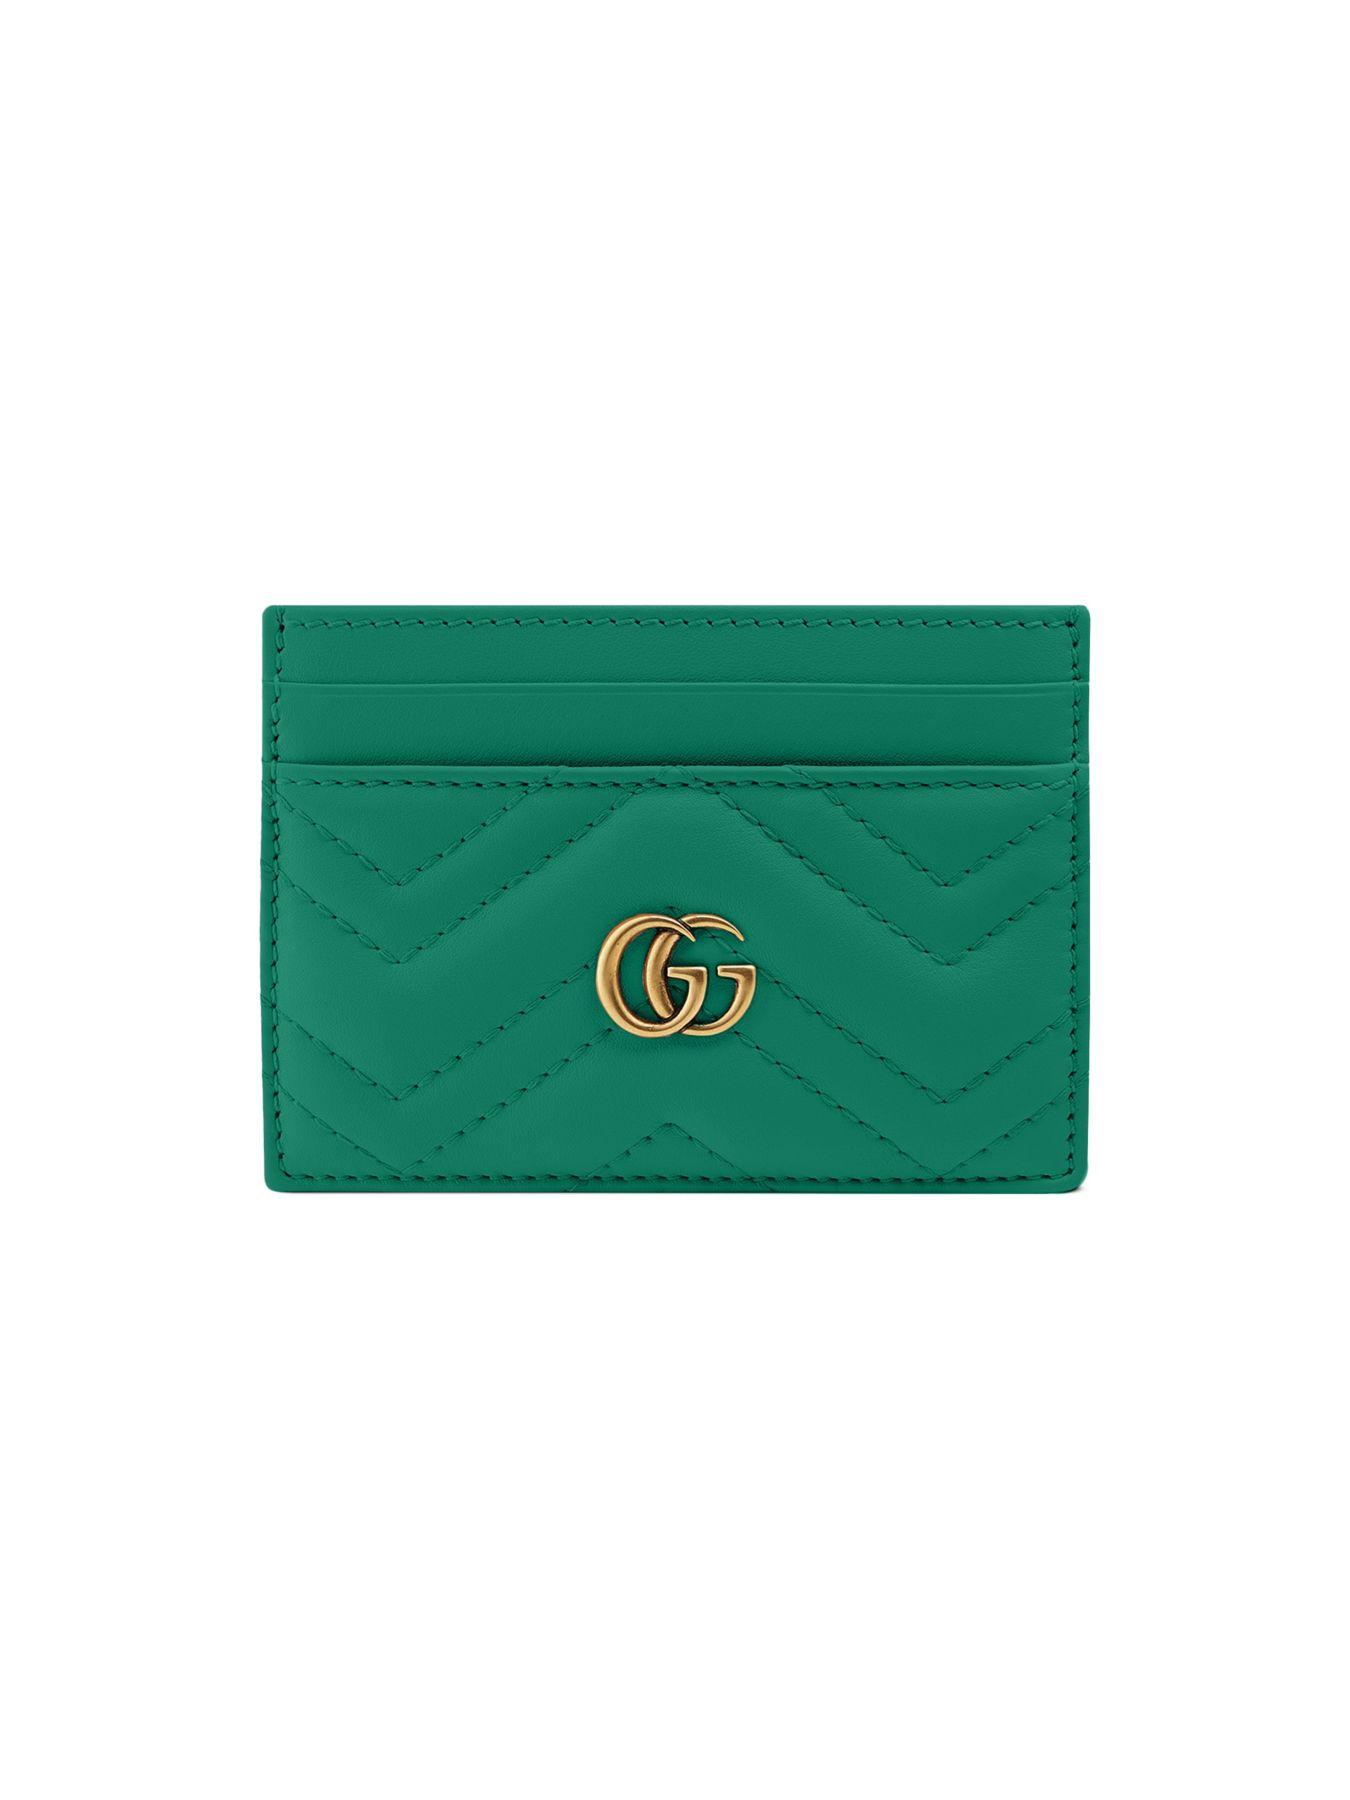 Gucci Gg Marmont Card Case in Green | Lyst